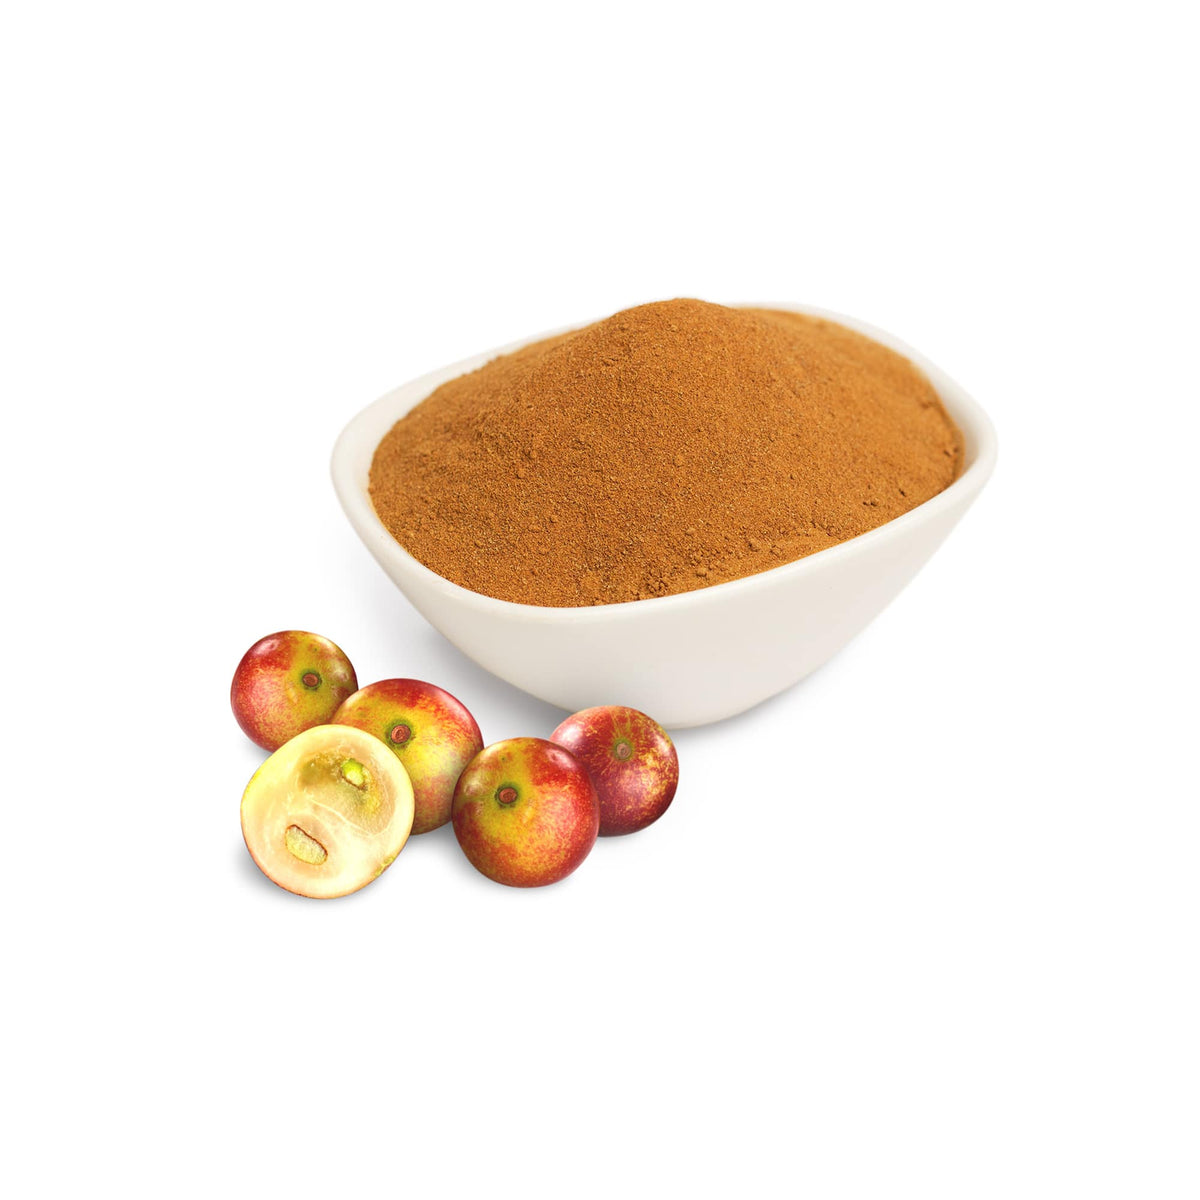 Sunfood - Raw Organic Camu Camu Powder A Tangy Superfood Boost for Smoothies and Juices Vegan 3.5 oz.